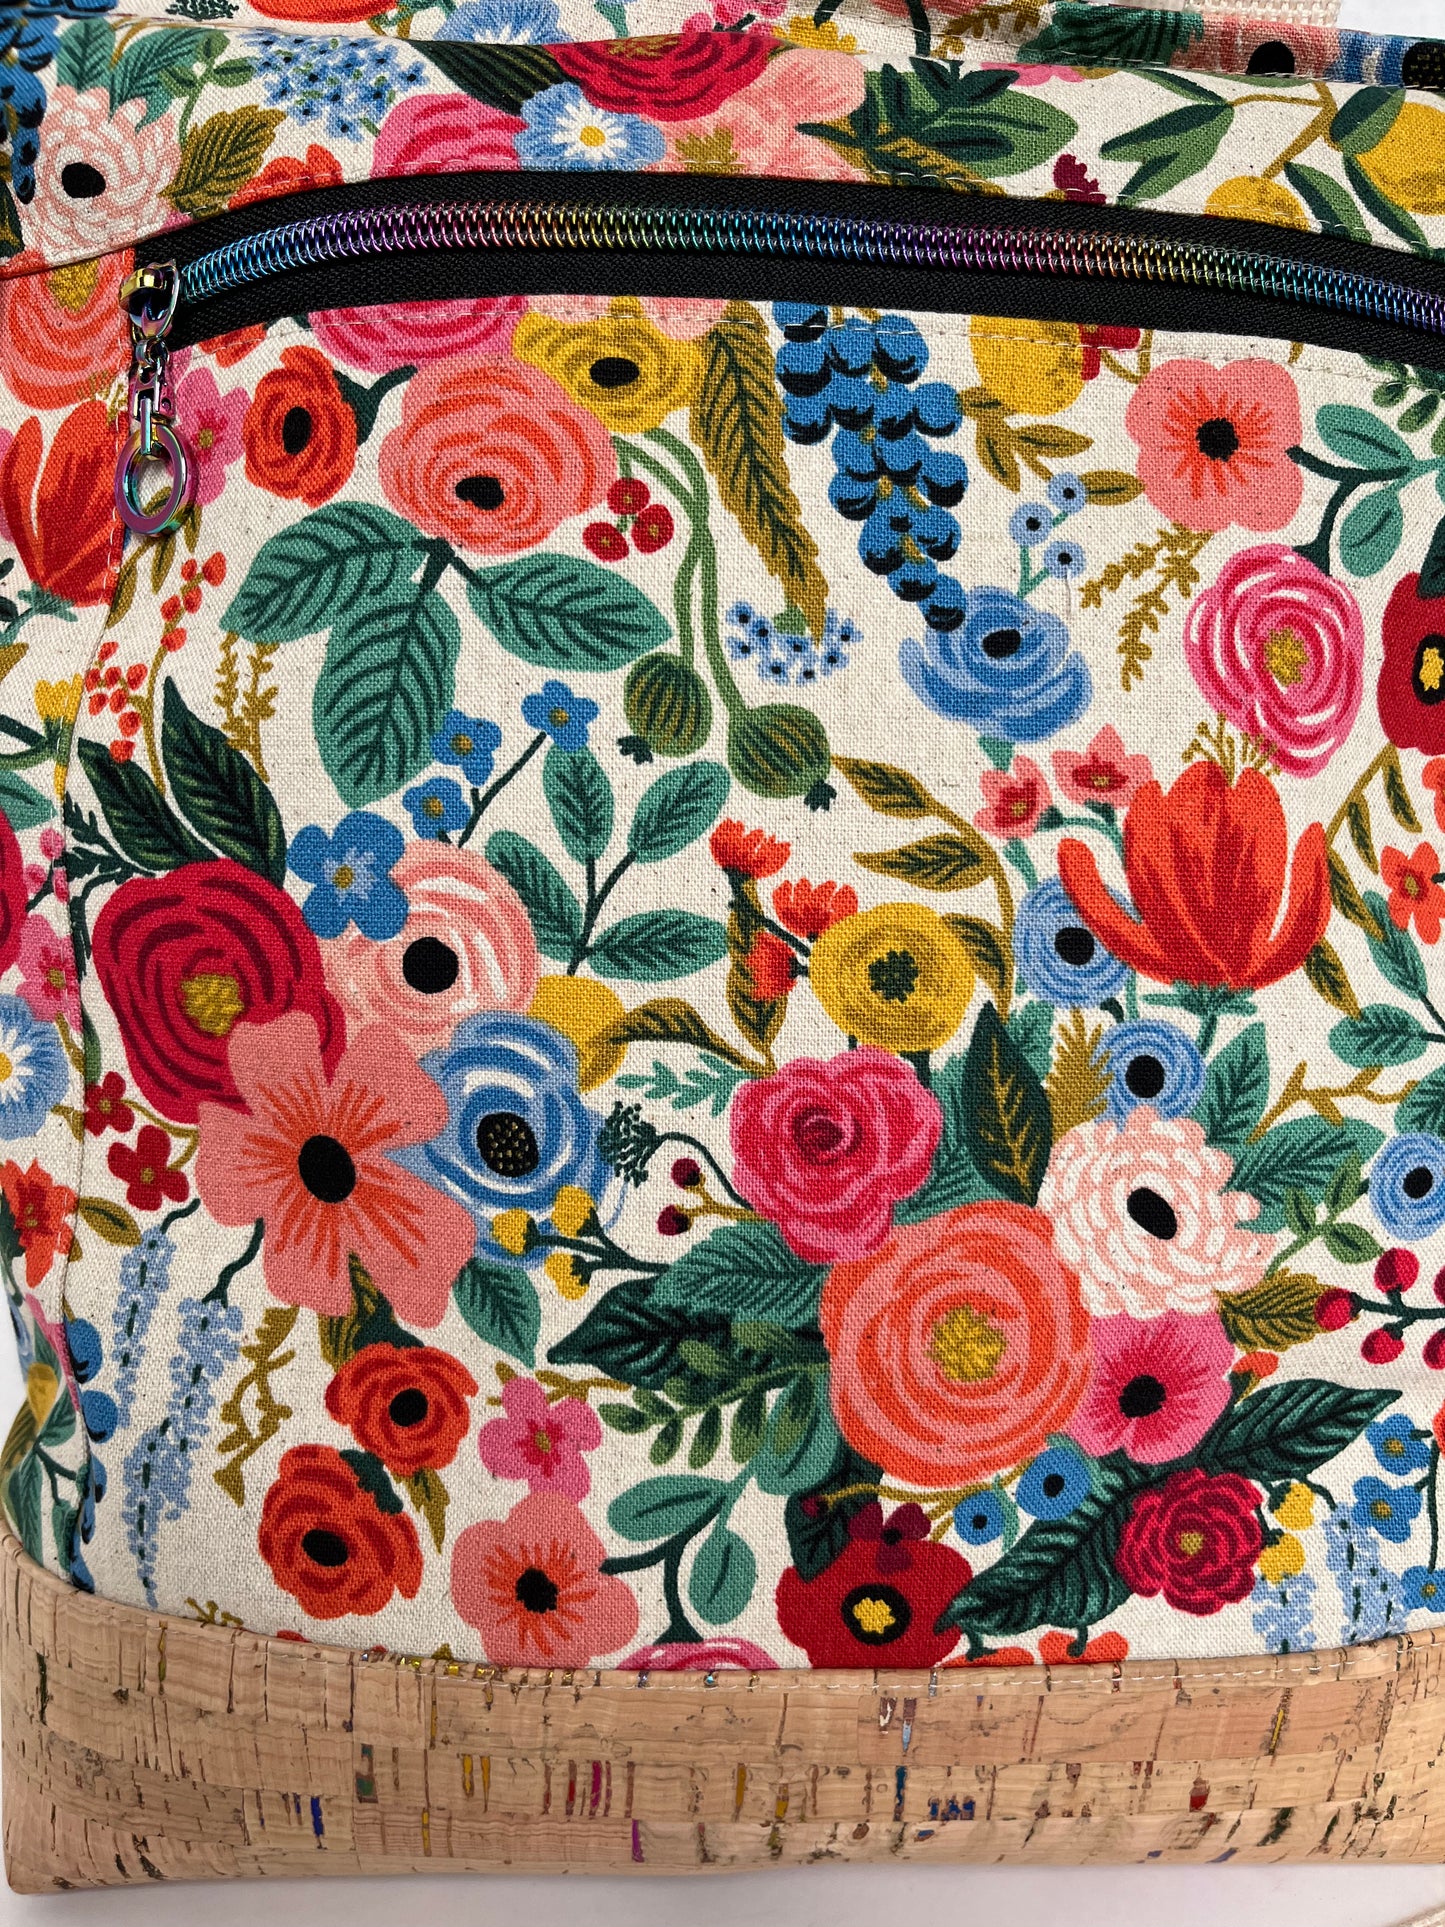 Floral Rifle Paper Co Canvas Cross body Tote Bag